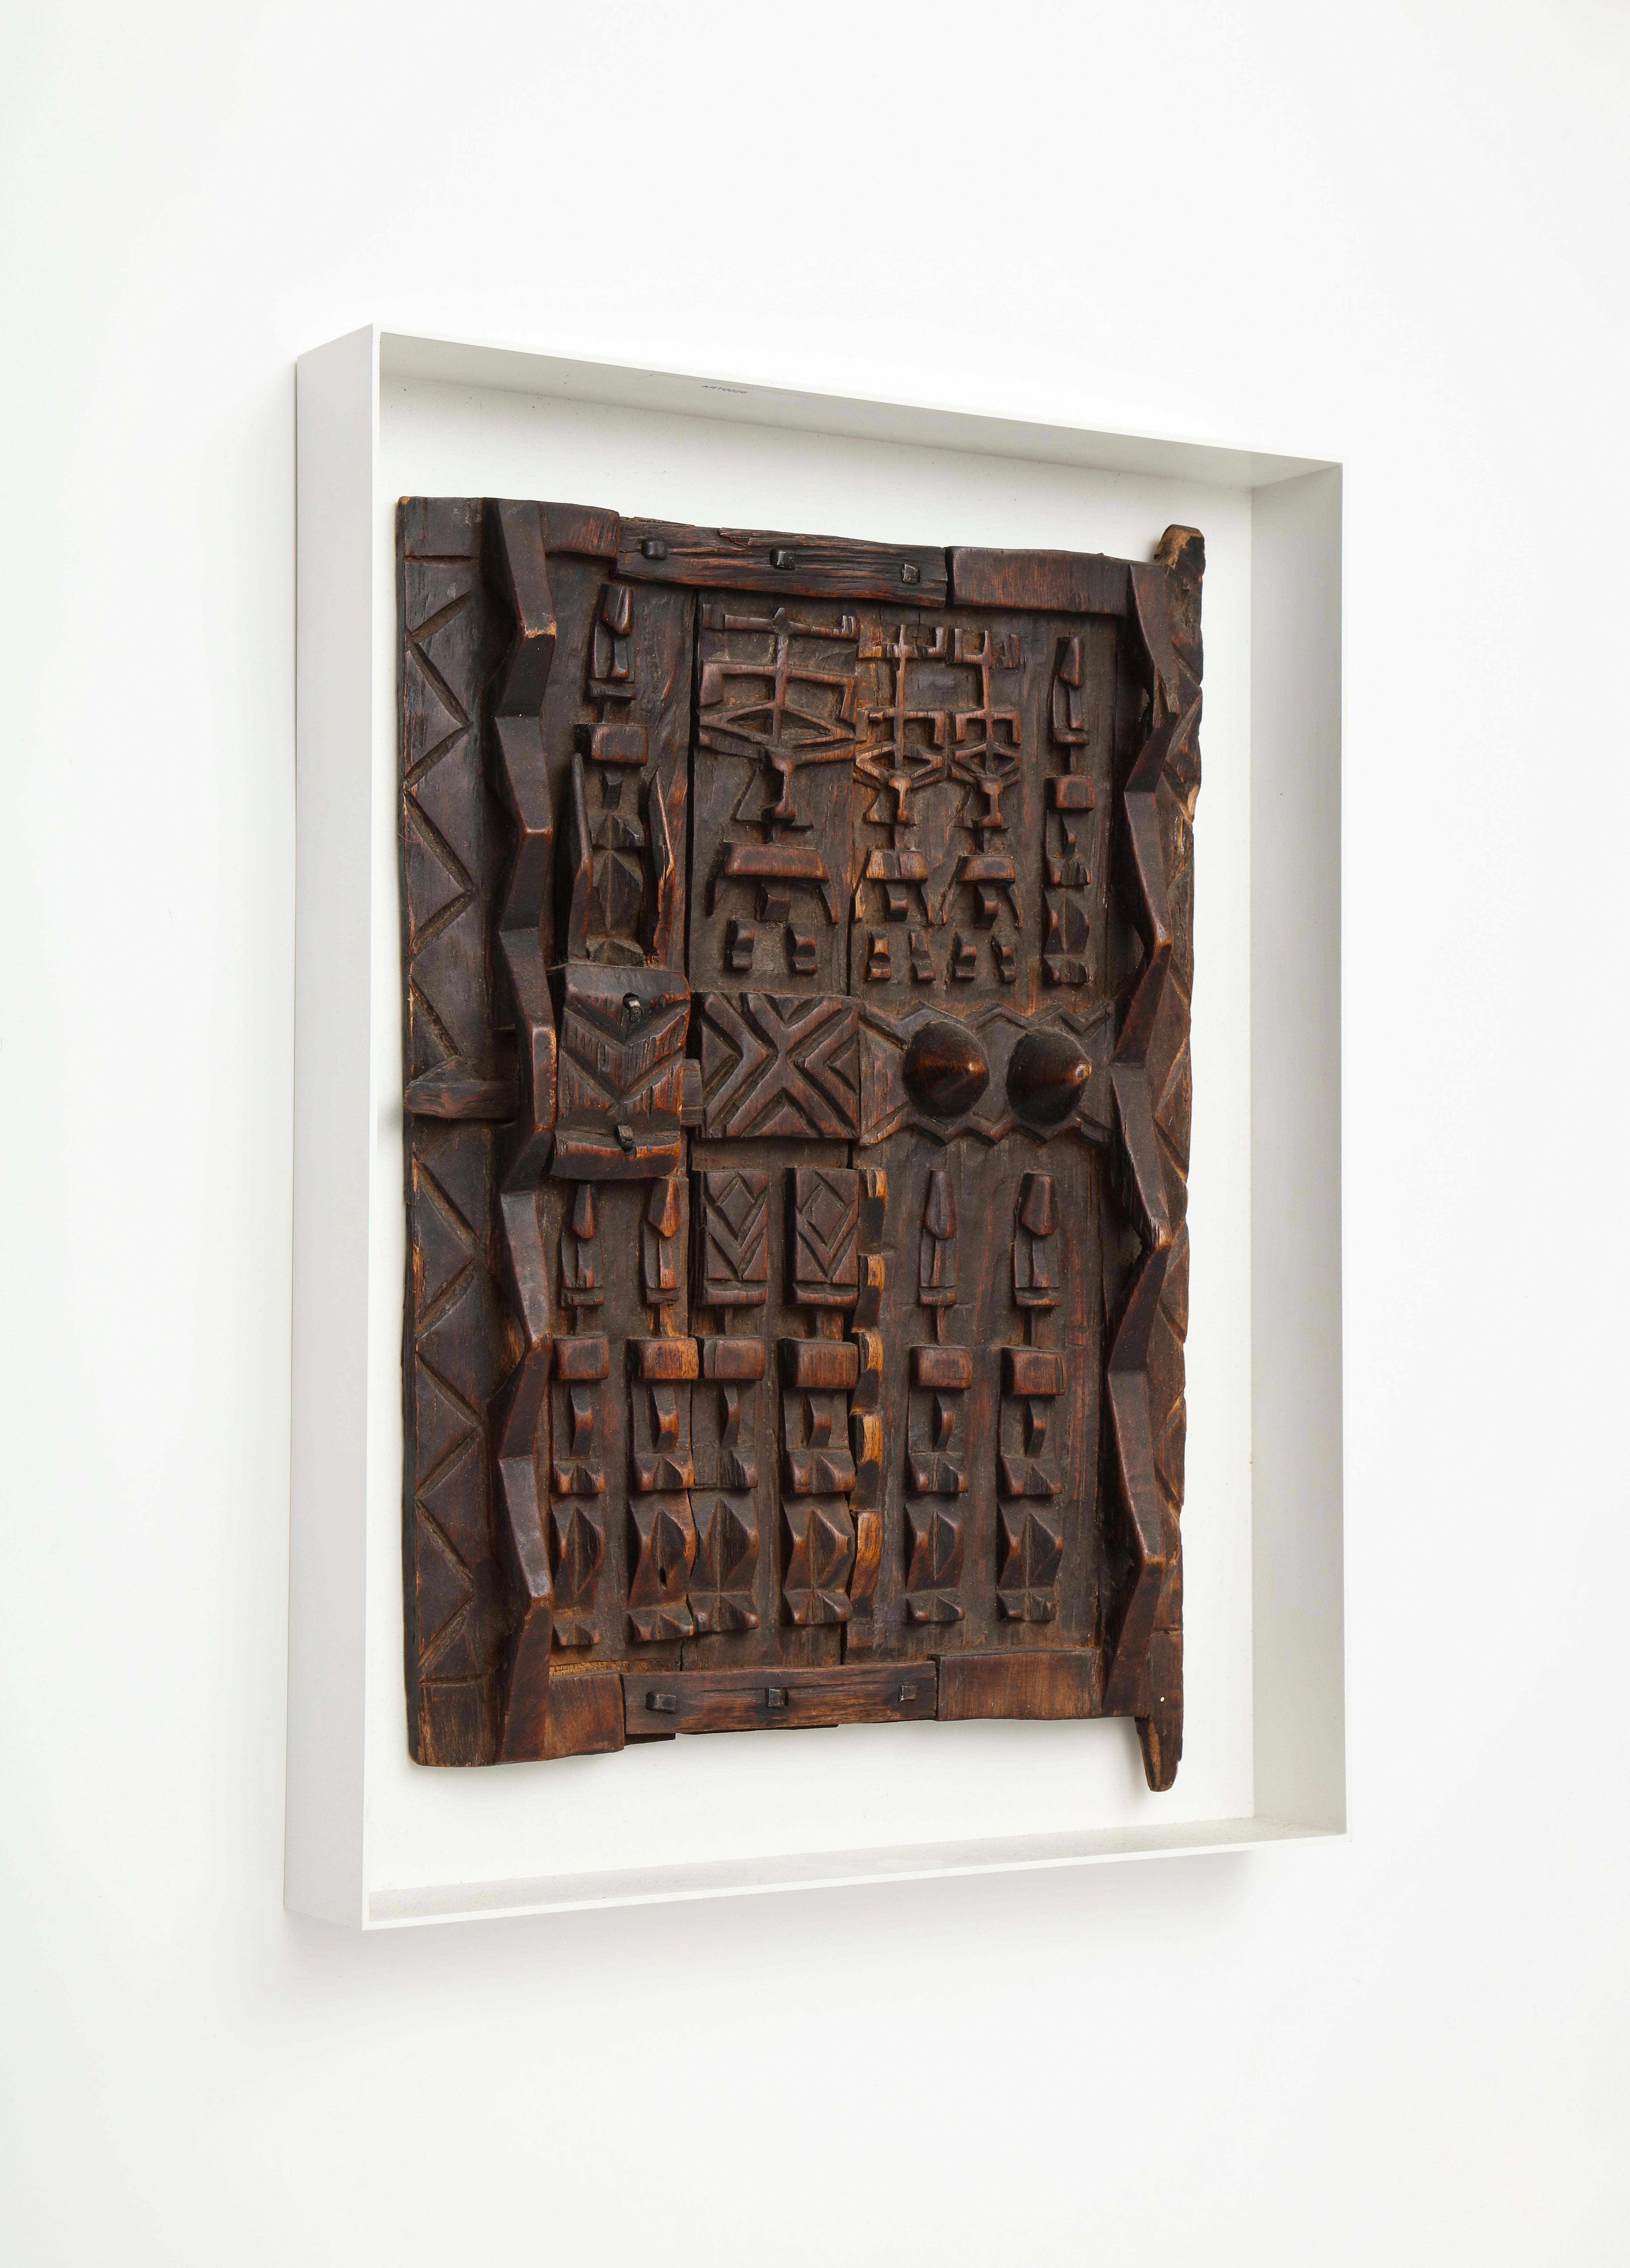 Door panel in the style of a Dogon Tribe granary door panel, carved wood. Mounted in custom painted metal shadow box frame.

The Dogon, subsistence farmers who hold ancient animist beliefs, are one of central Mali's ethnic groups. In the 15th